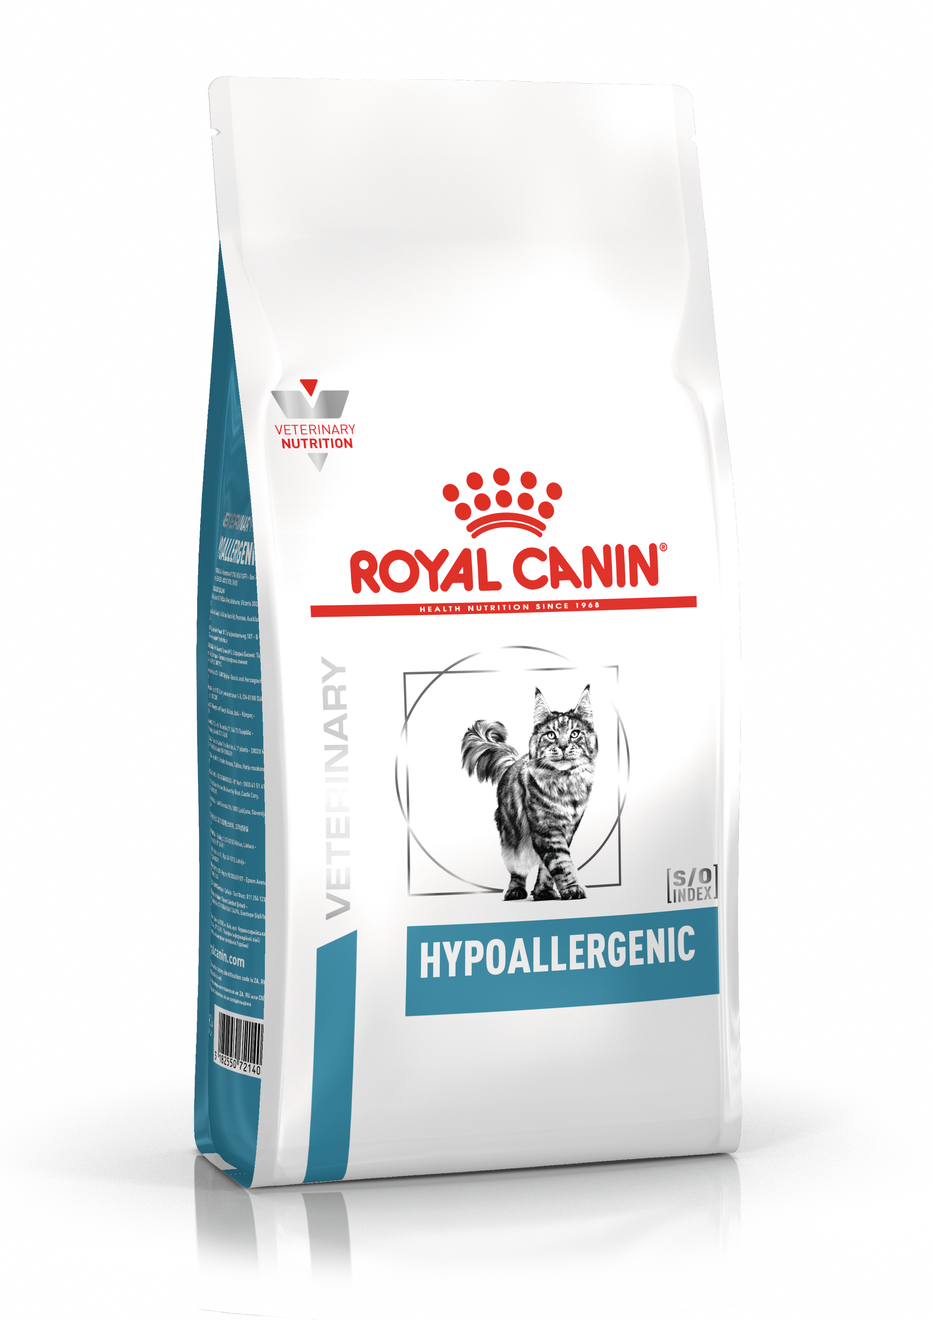 Royal Canin Hypoallergenic cat